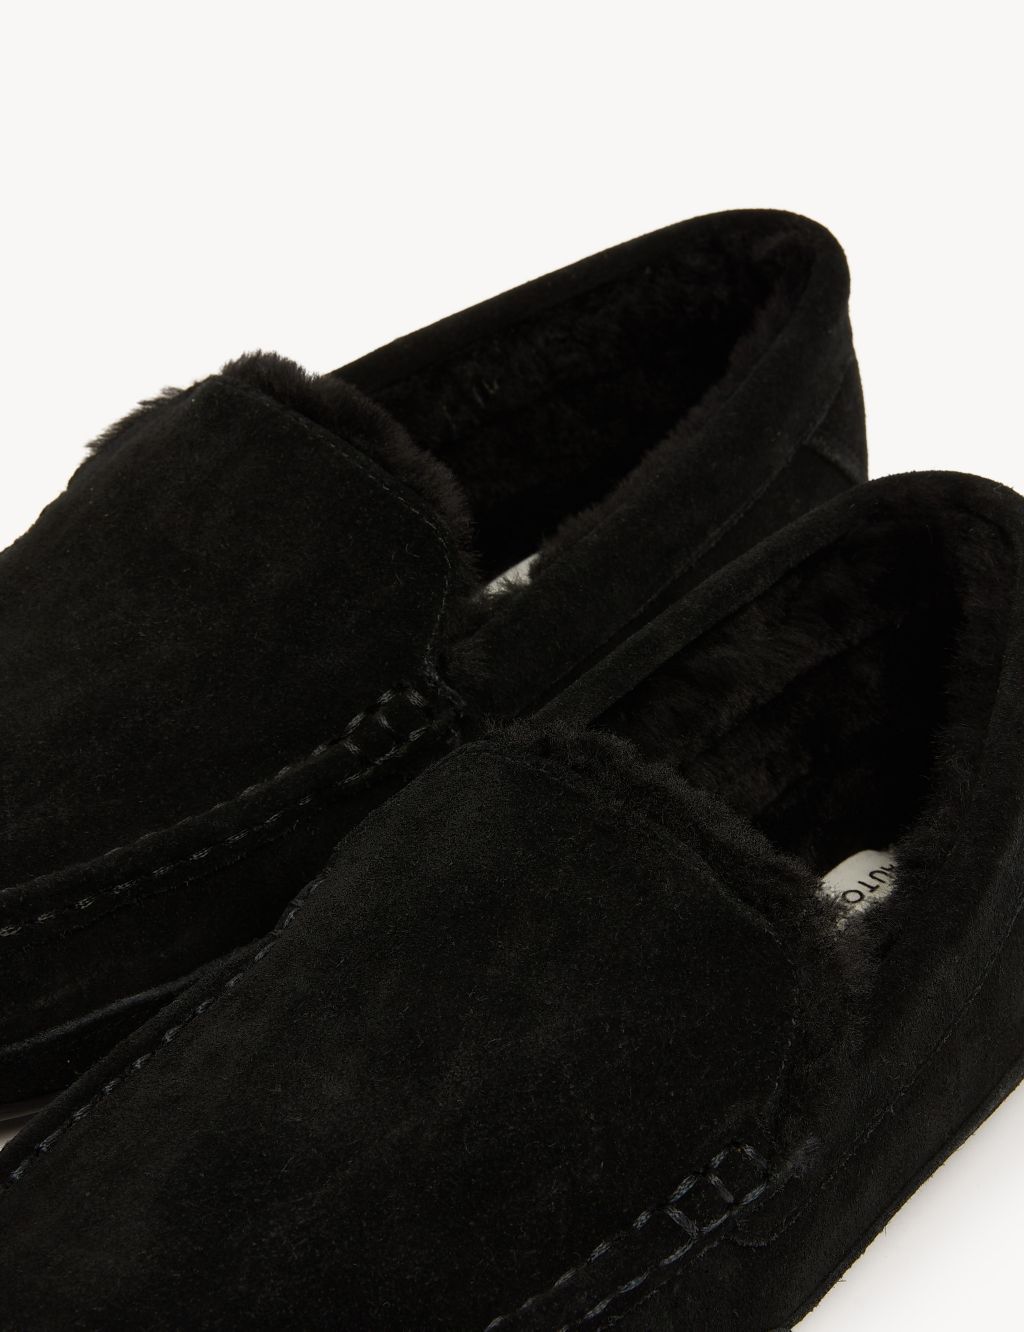 Suede Moccasin Slippers with Freshfeet™ image 2